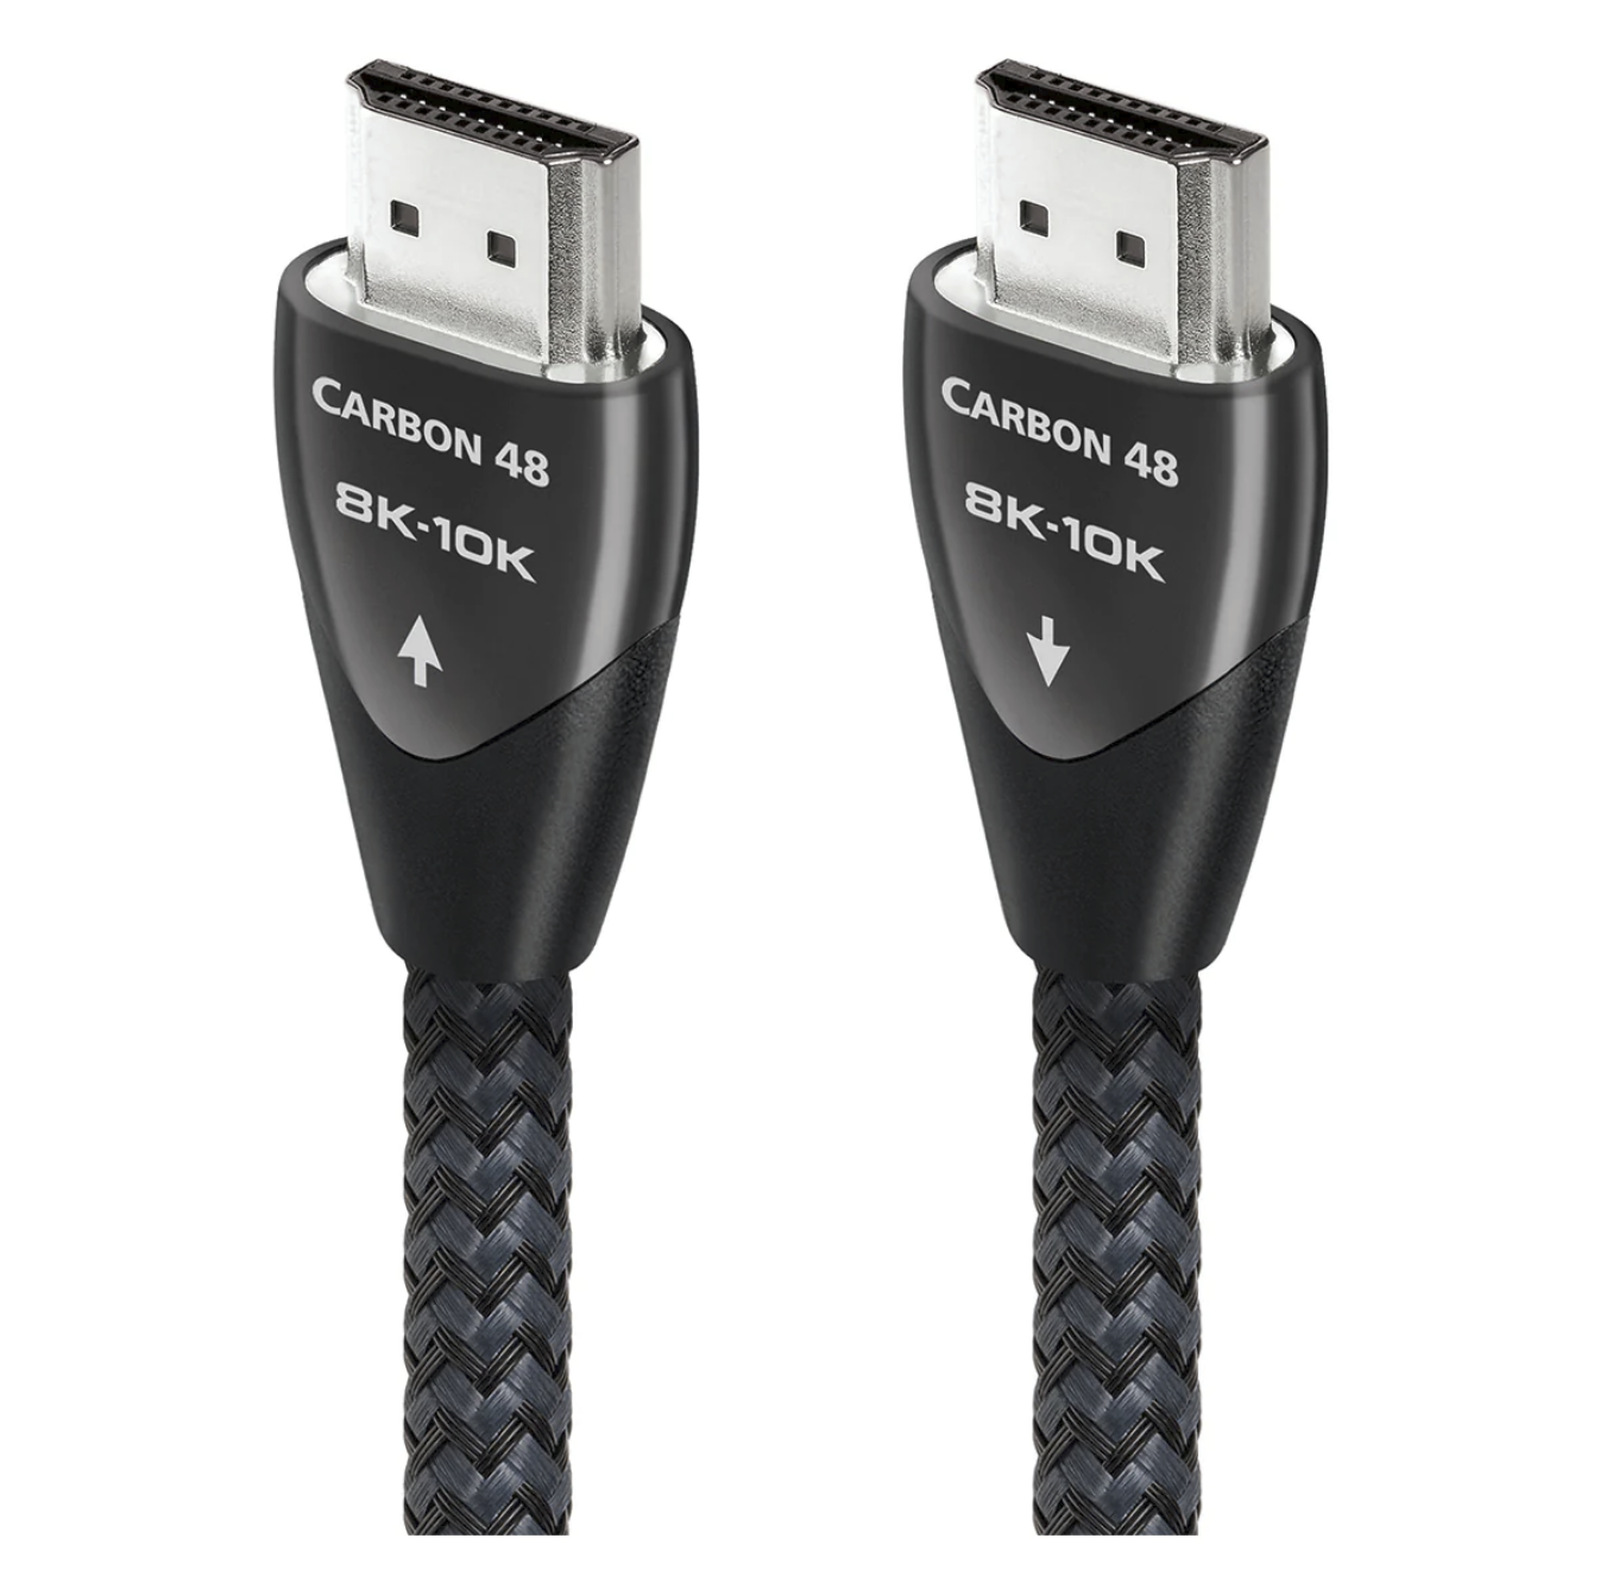 Cabo HDMI AudioQuest Carbon 48 - 8K-10K - 48Gbps - 1,5m